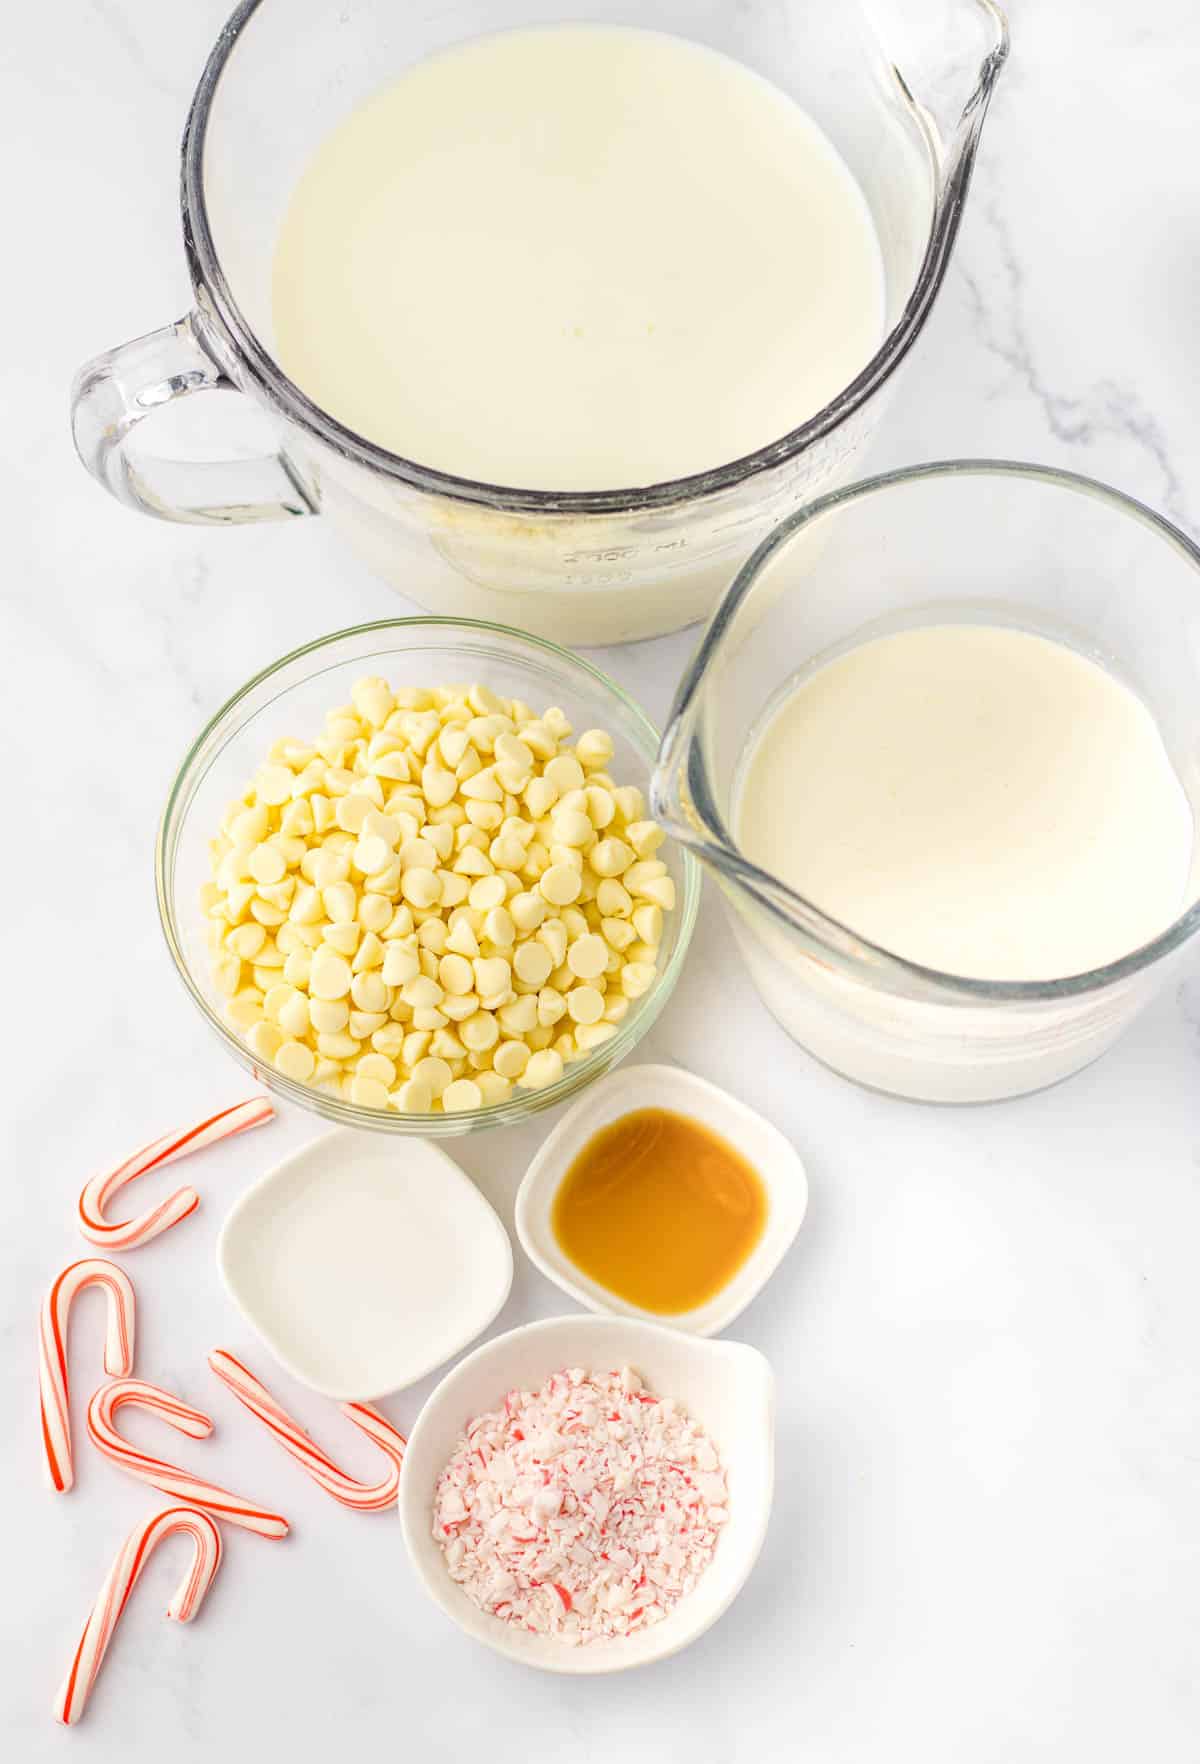 The ingredients for a candy cane milkshake.